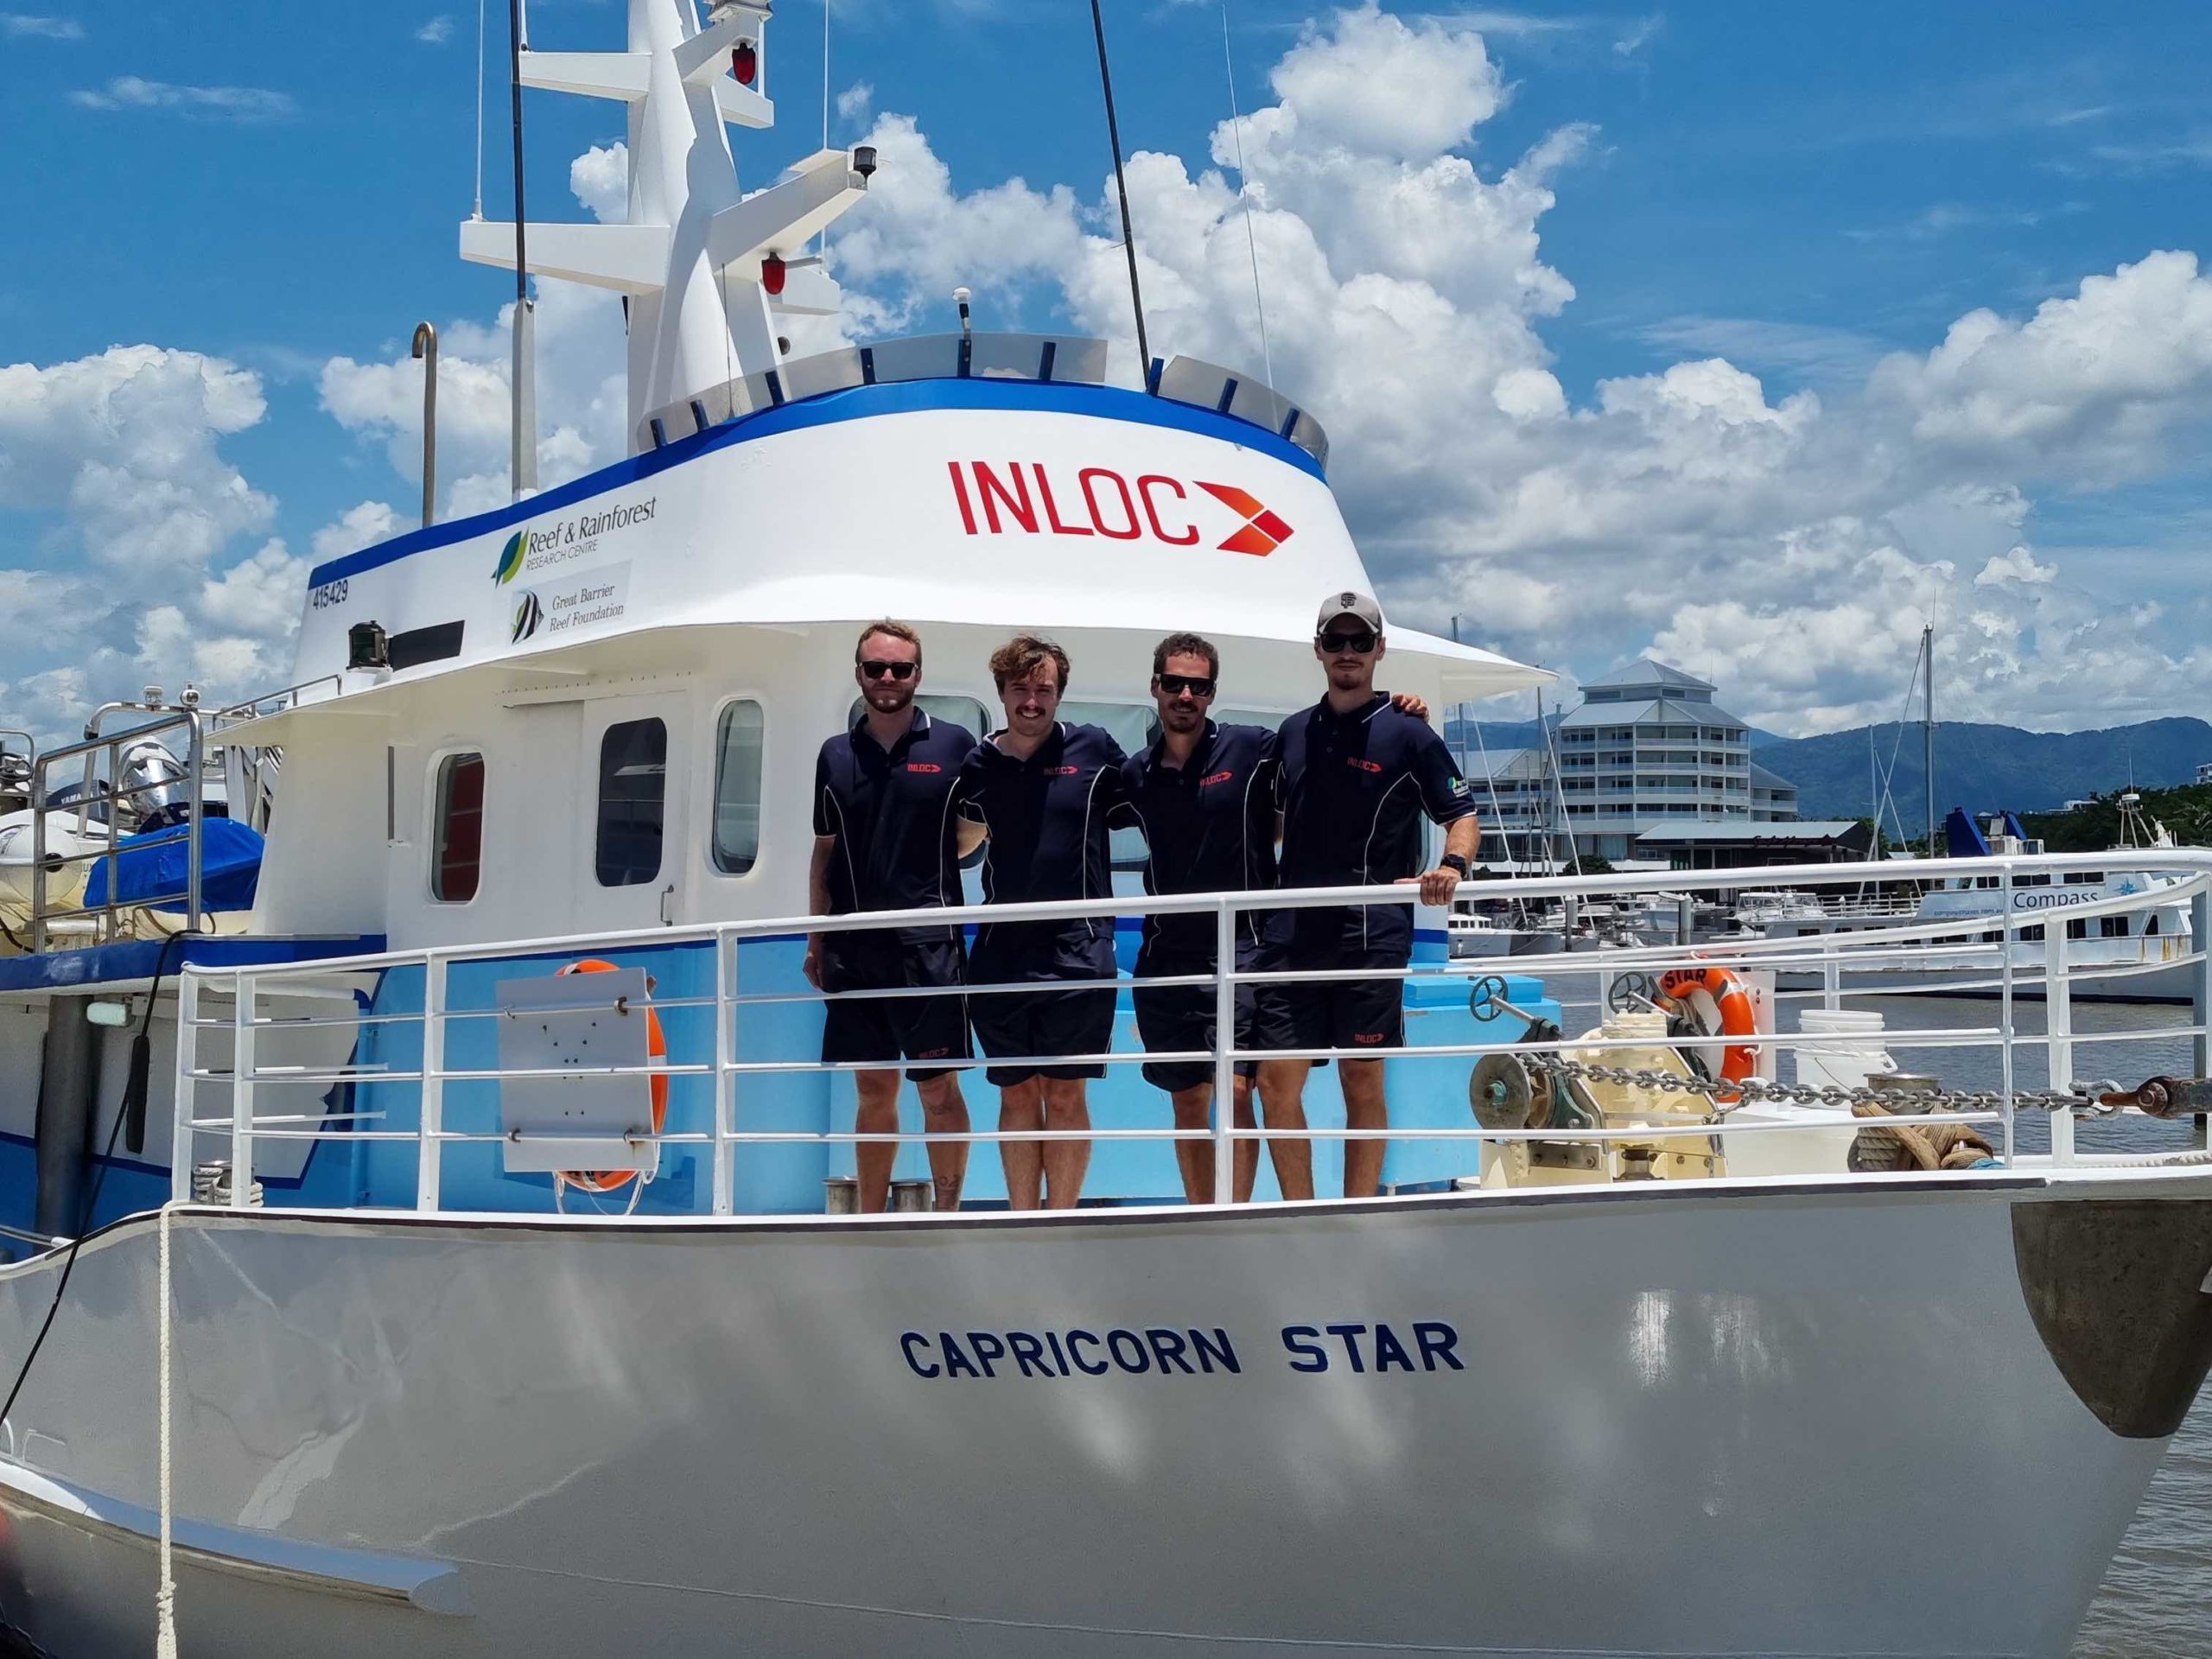 New COTS Control Program vessel. The Capricorn Star and crew departing on their first voyage. Credit: RRRC